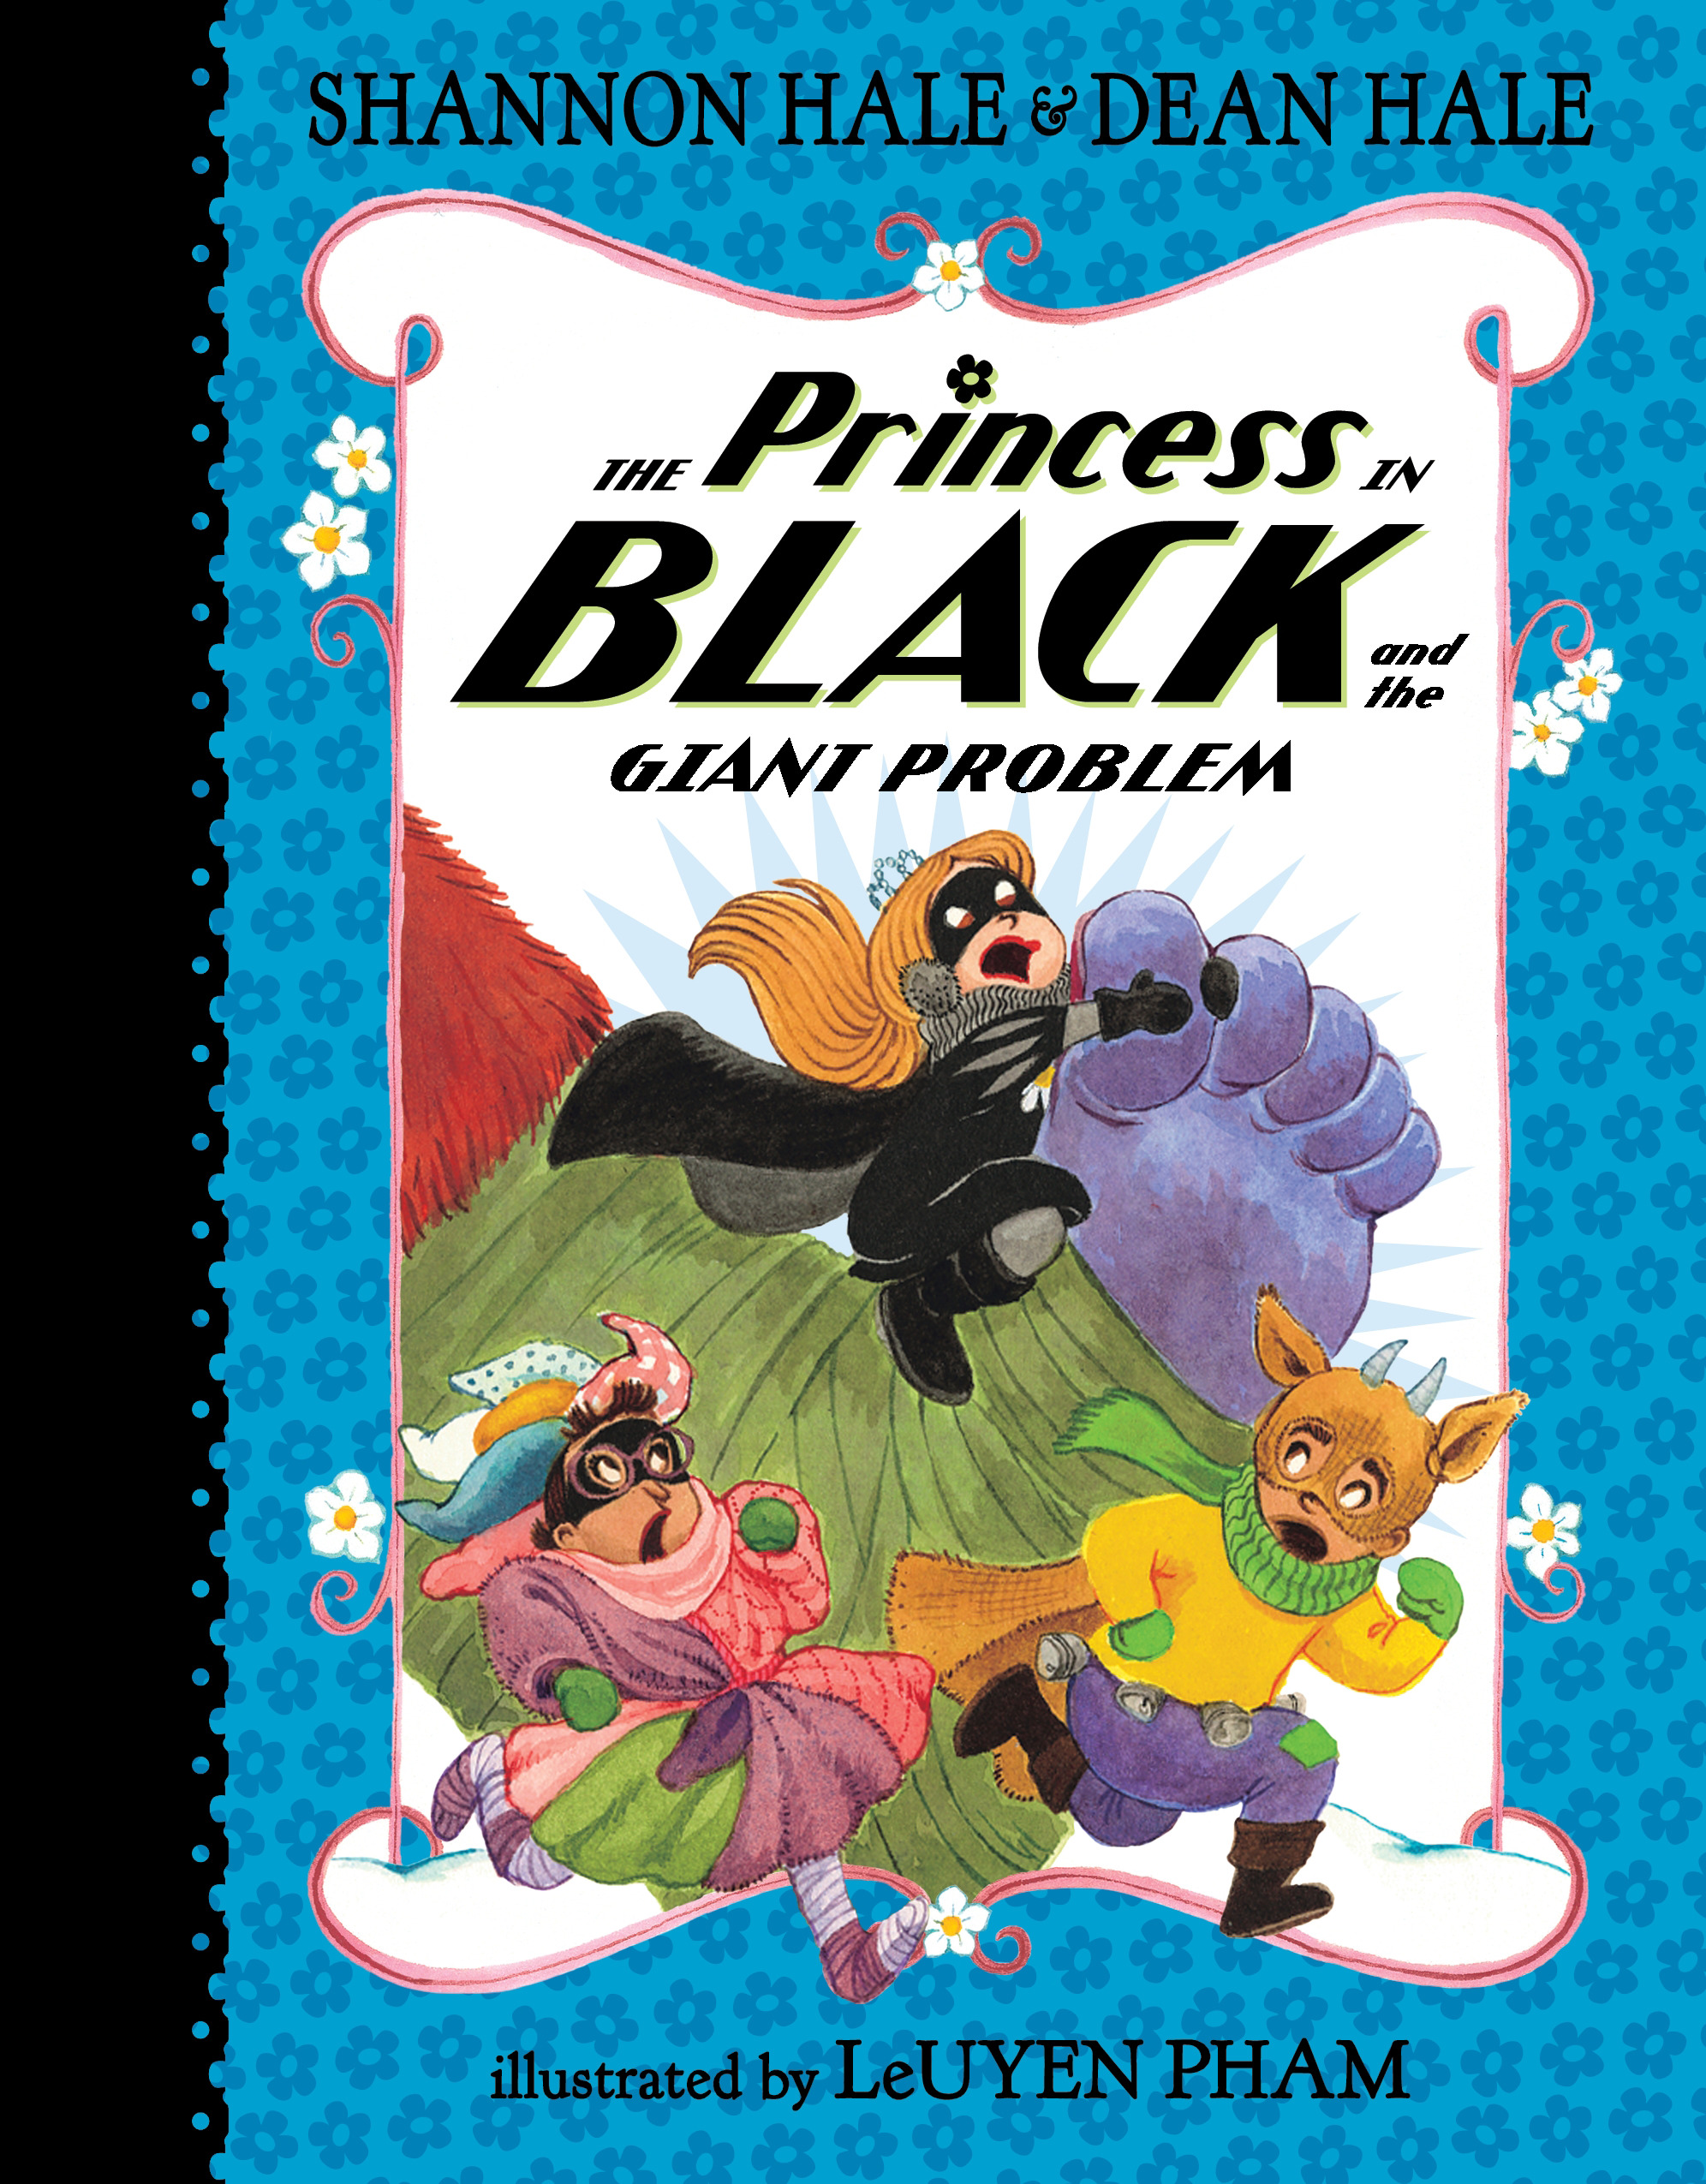 Princess in Black and the Giant Problem (The) | Hale, Shannon